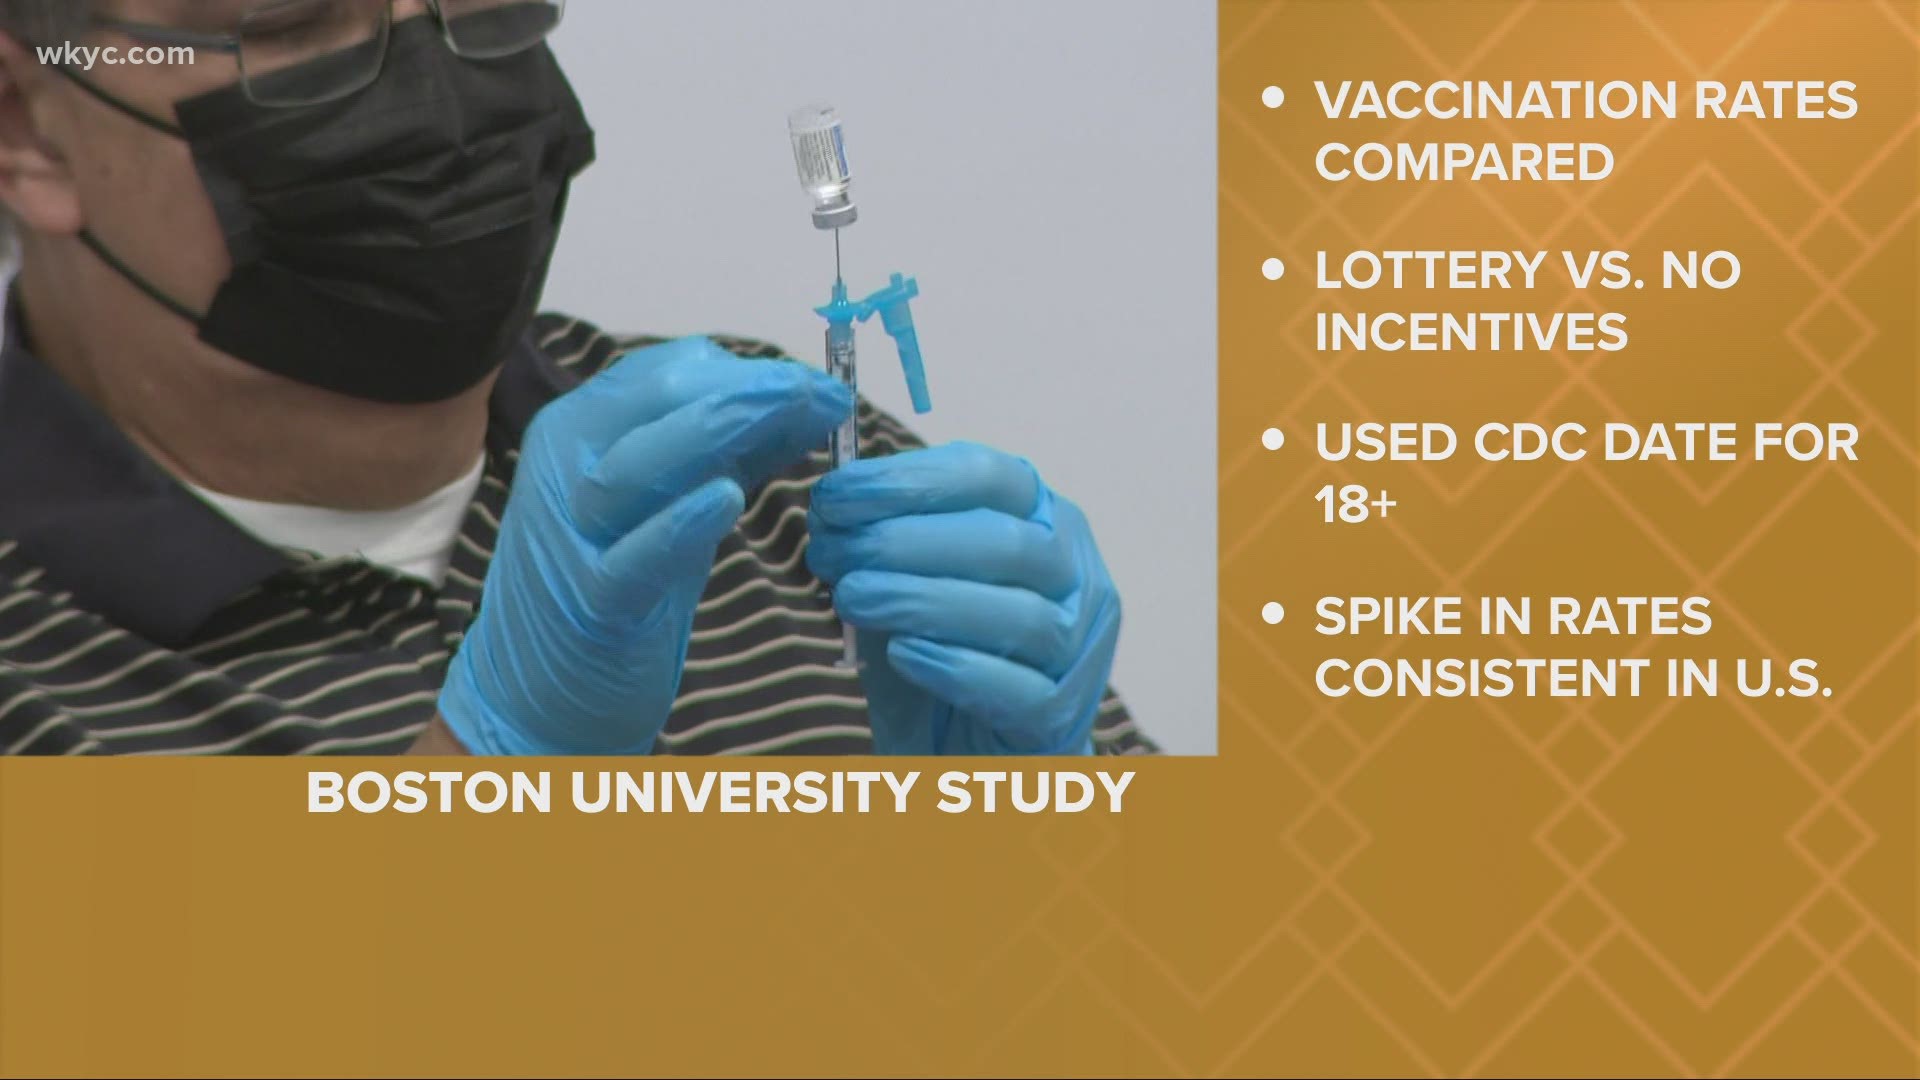 Researchers from the Boston University School of Medicine say that Ohio's Vax-a-Million incentive 'was not associated with an increase in COVID-19 vaccinations.'